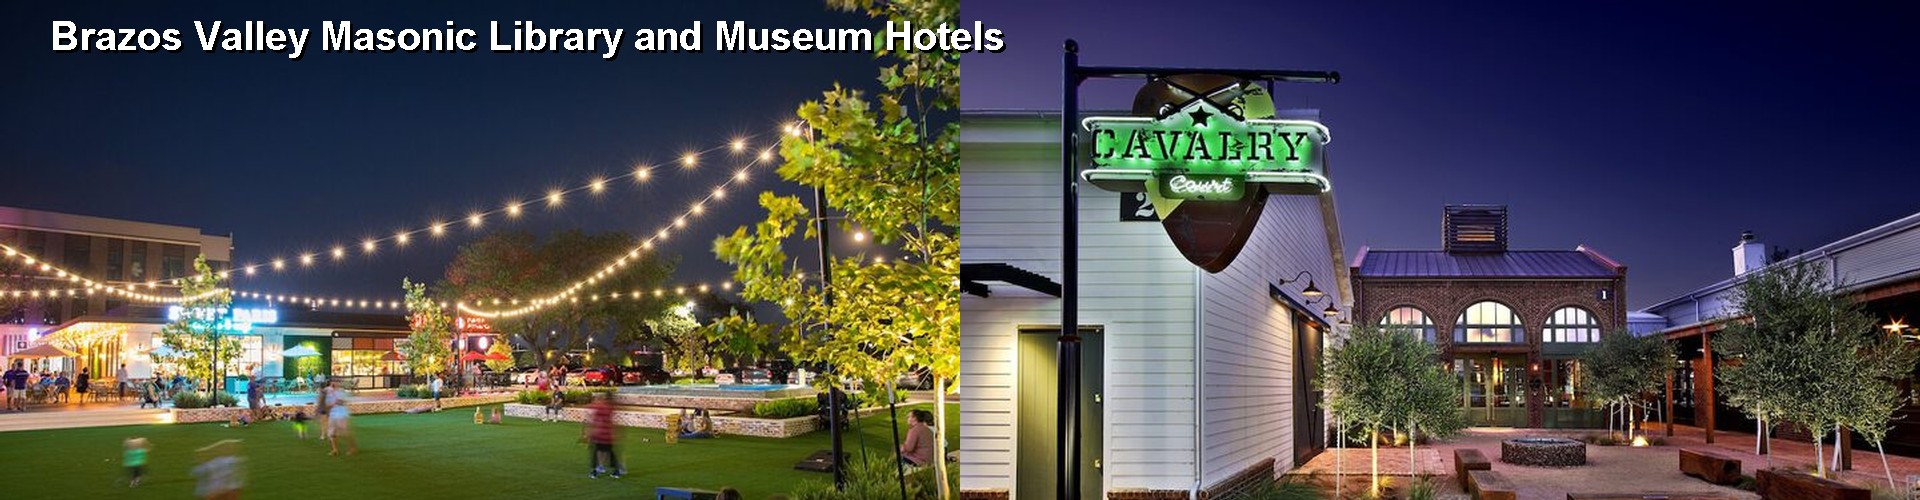 5 Best Hotels near Brazos Valley Masonic Library and Museum